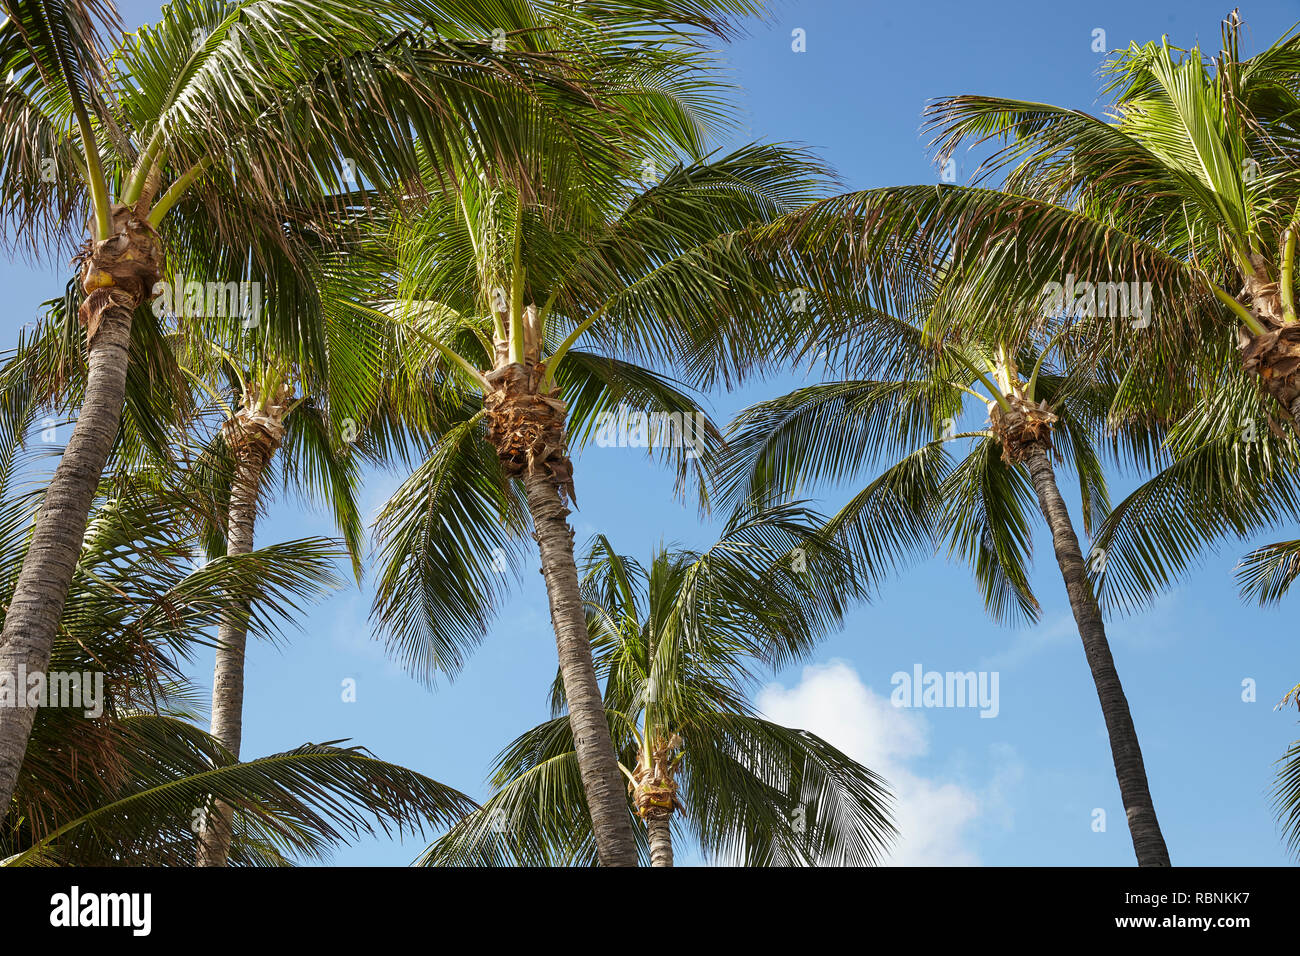 Low Angle View Of Palm Trees Against Blue Sky In Spain Stock Photo